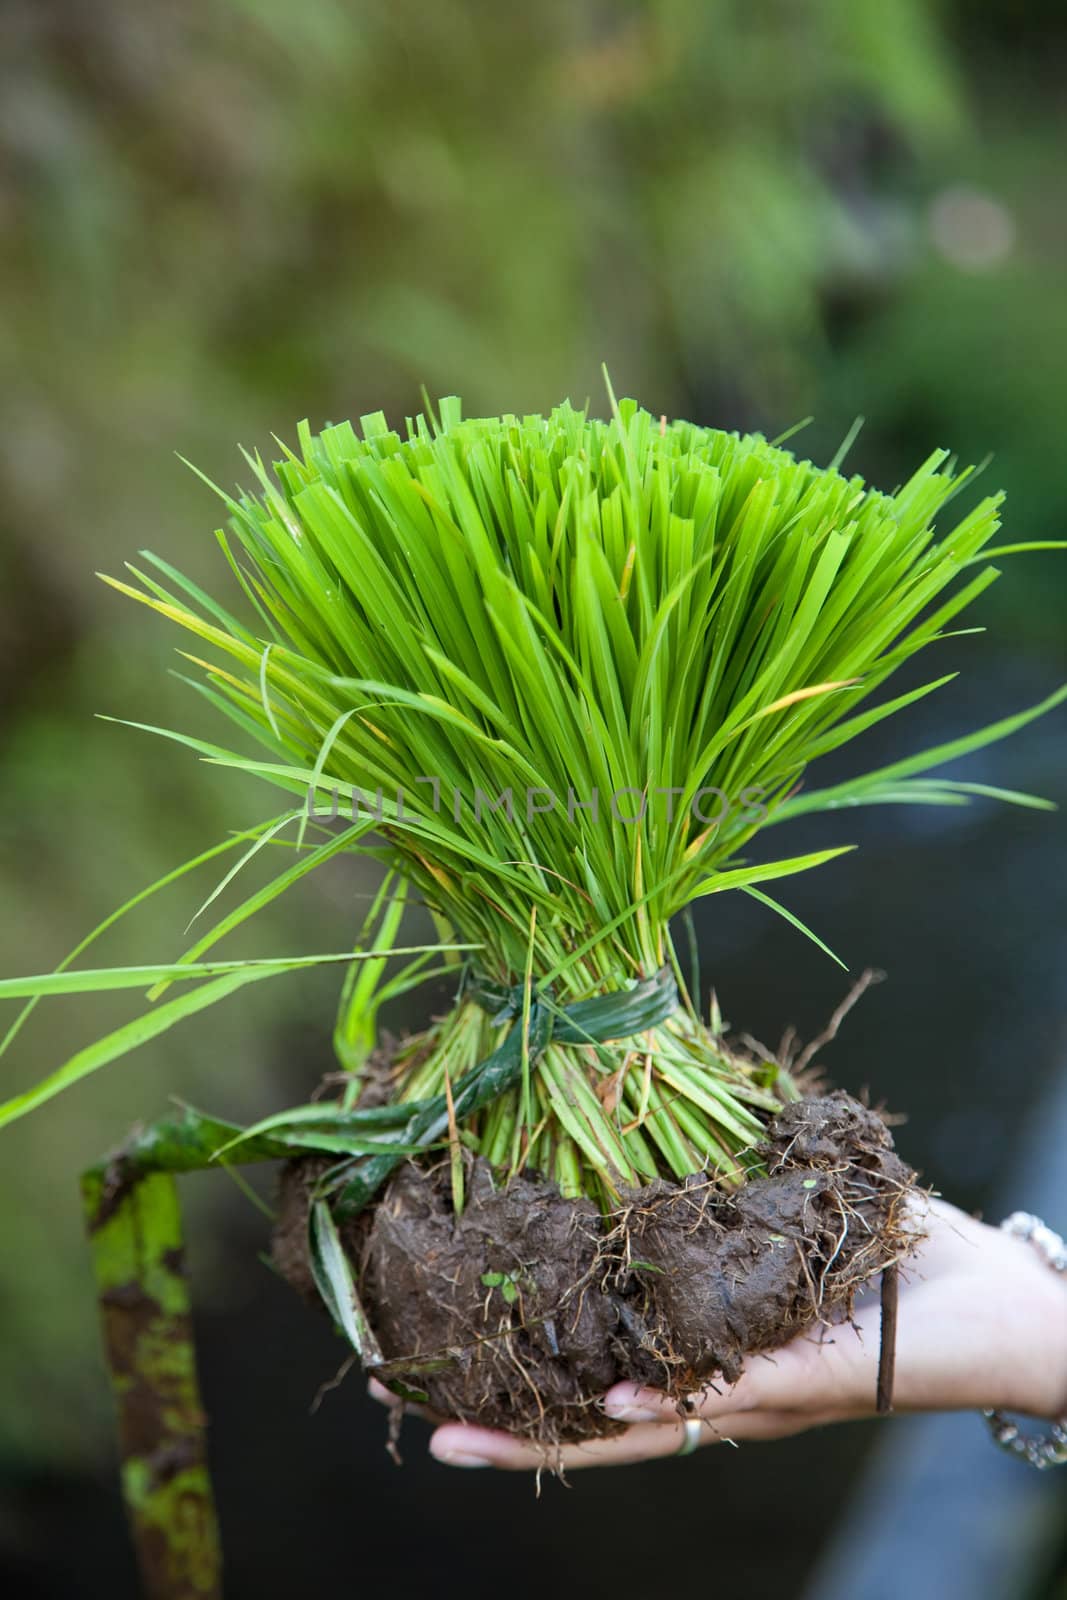 Young and fresh green riceplant in a hand